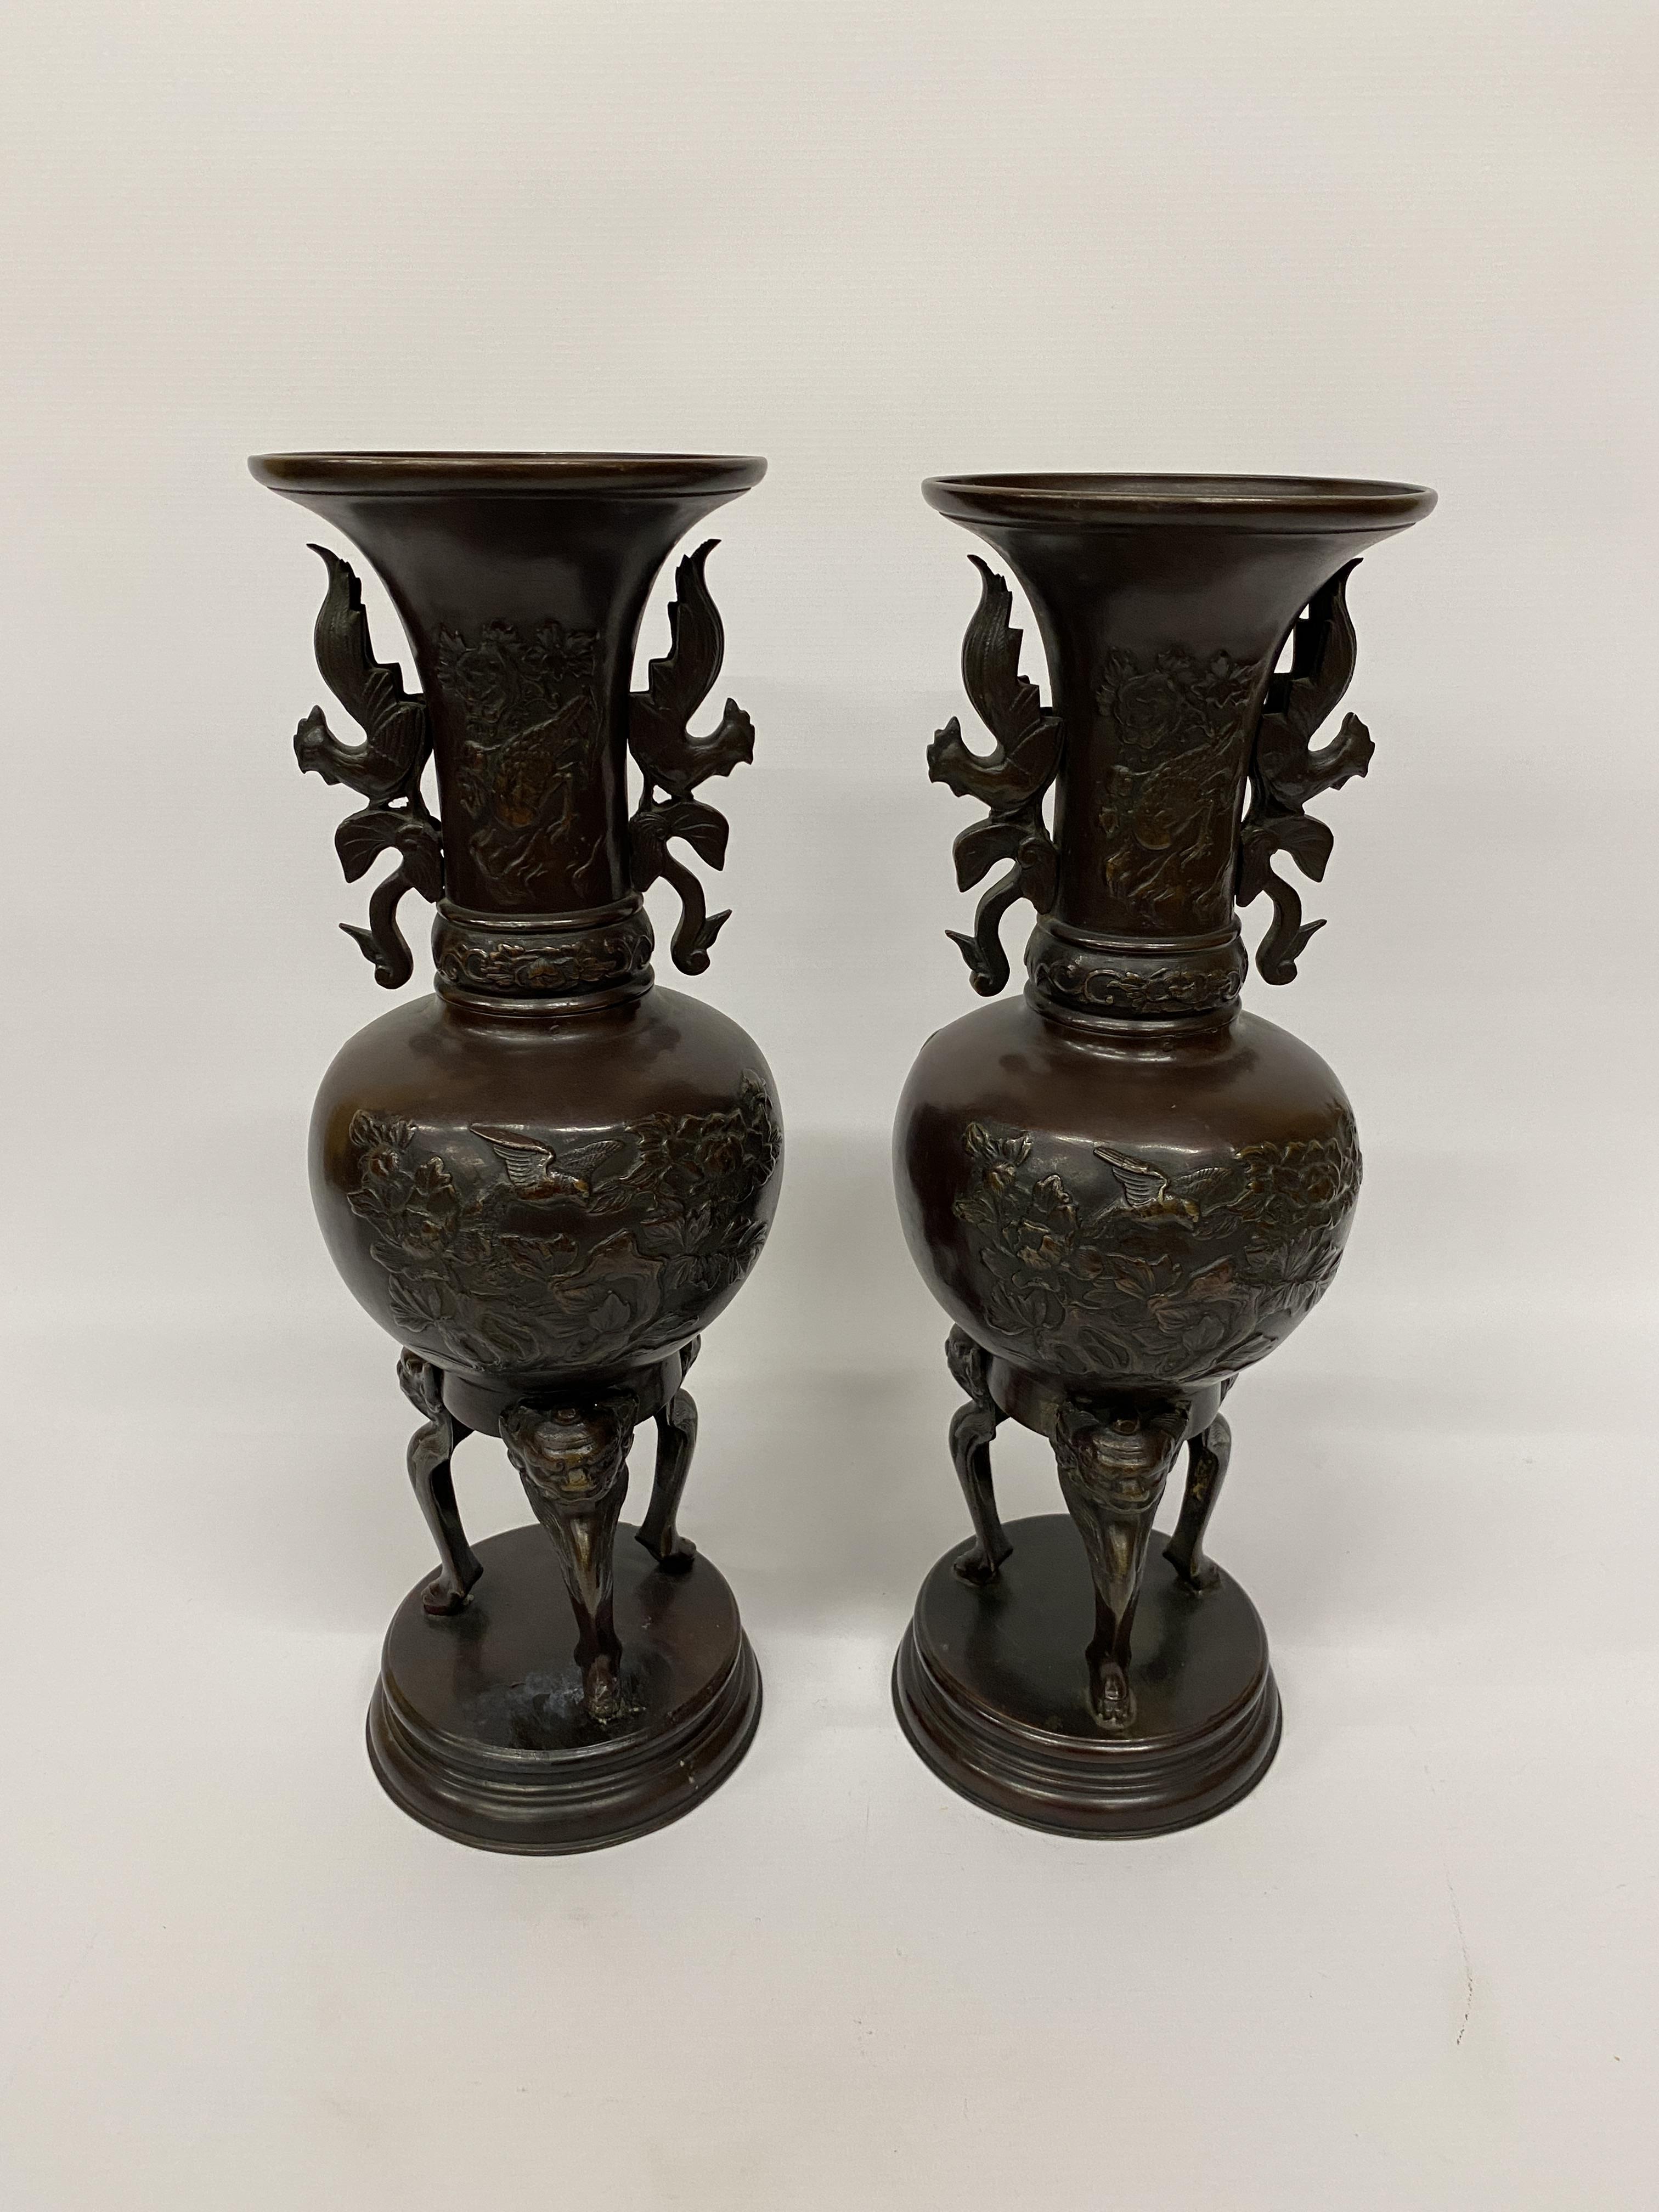 A PAIR OF LARGE JAPANESE MEIJI PERIOD (1868-1912) BRONZE VASE WITH TRIPOD LEGS ON BASE, HEIGHT 43CM